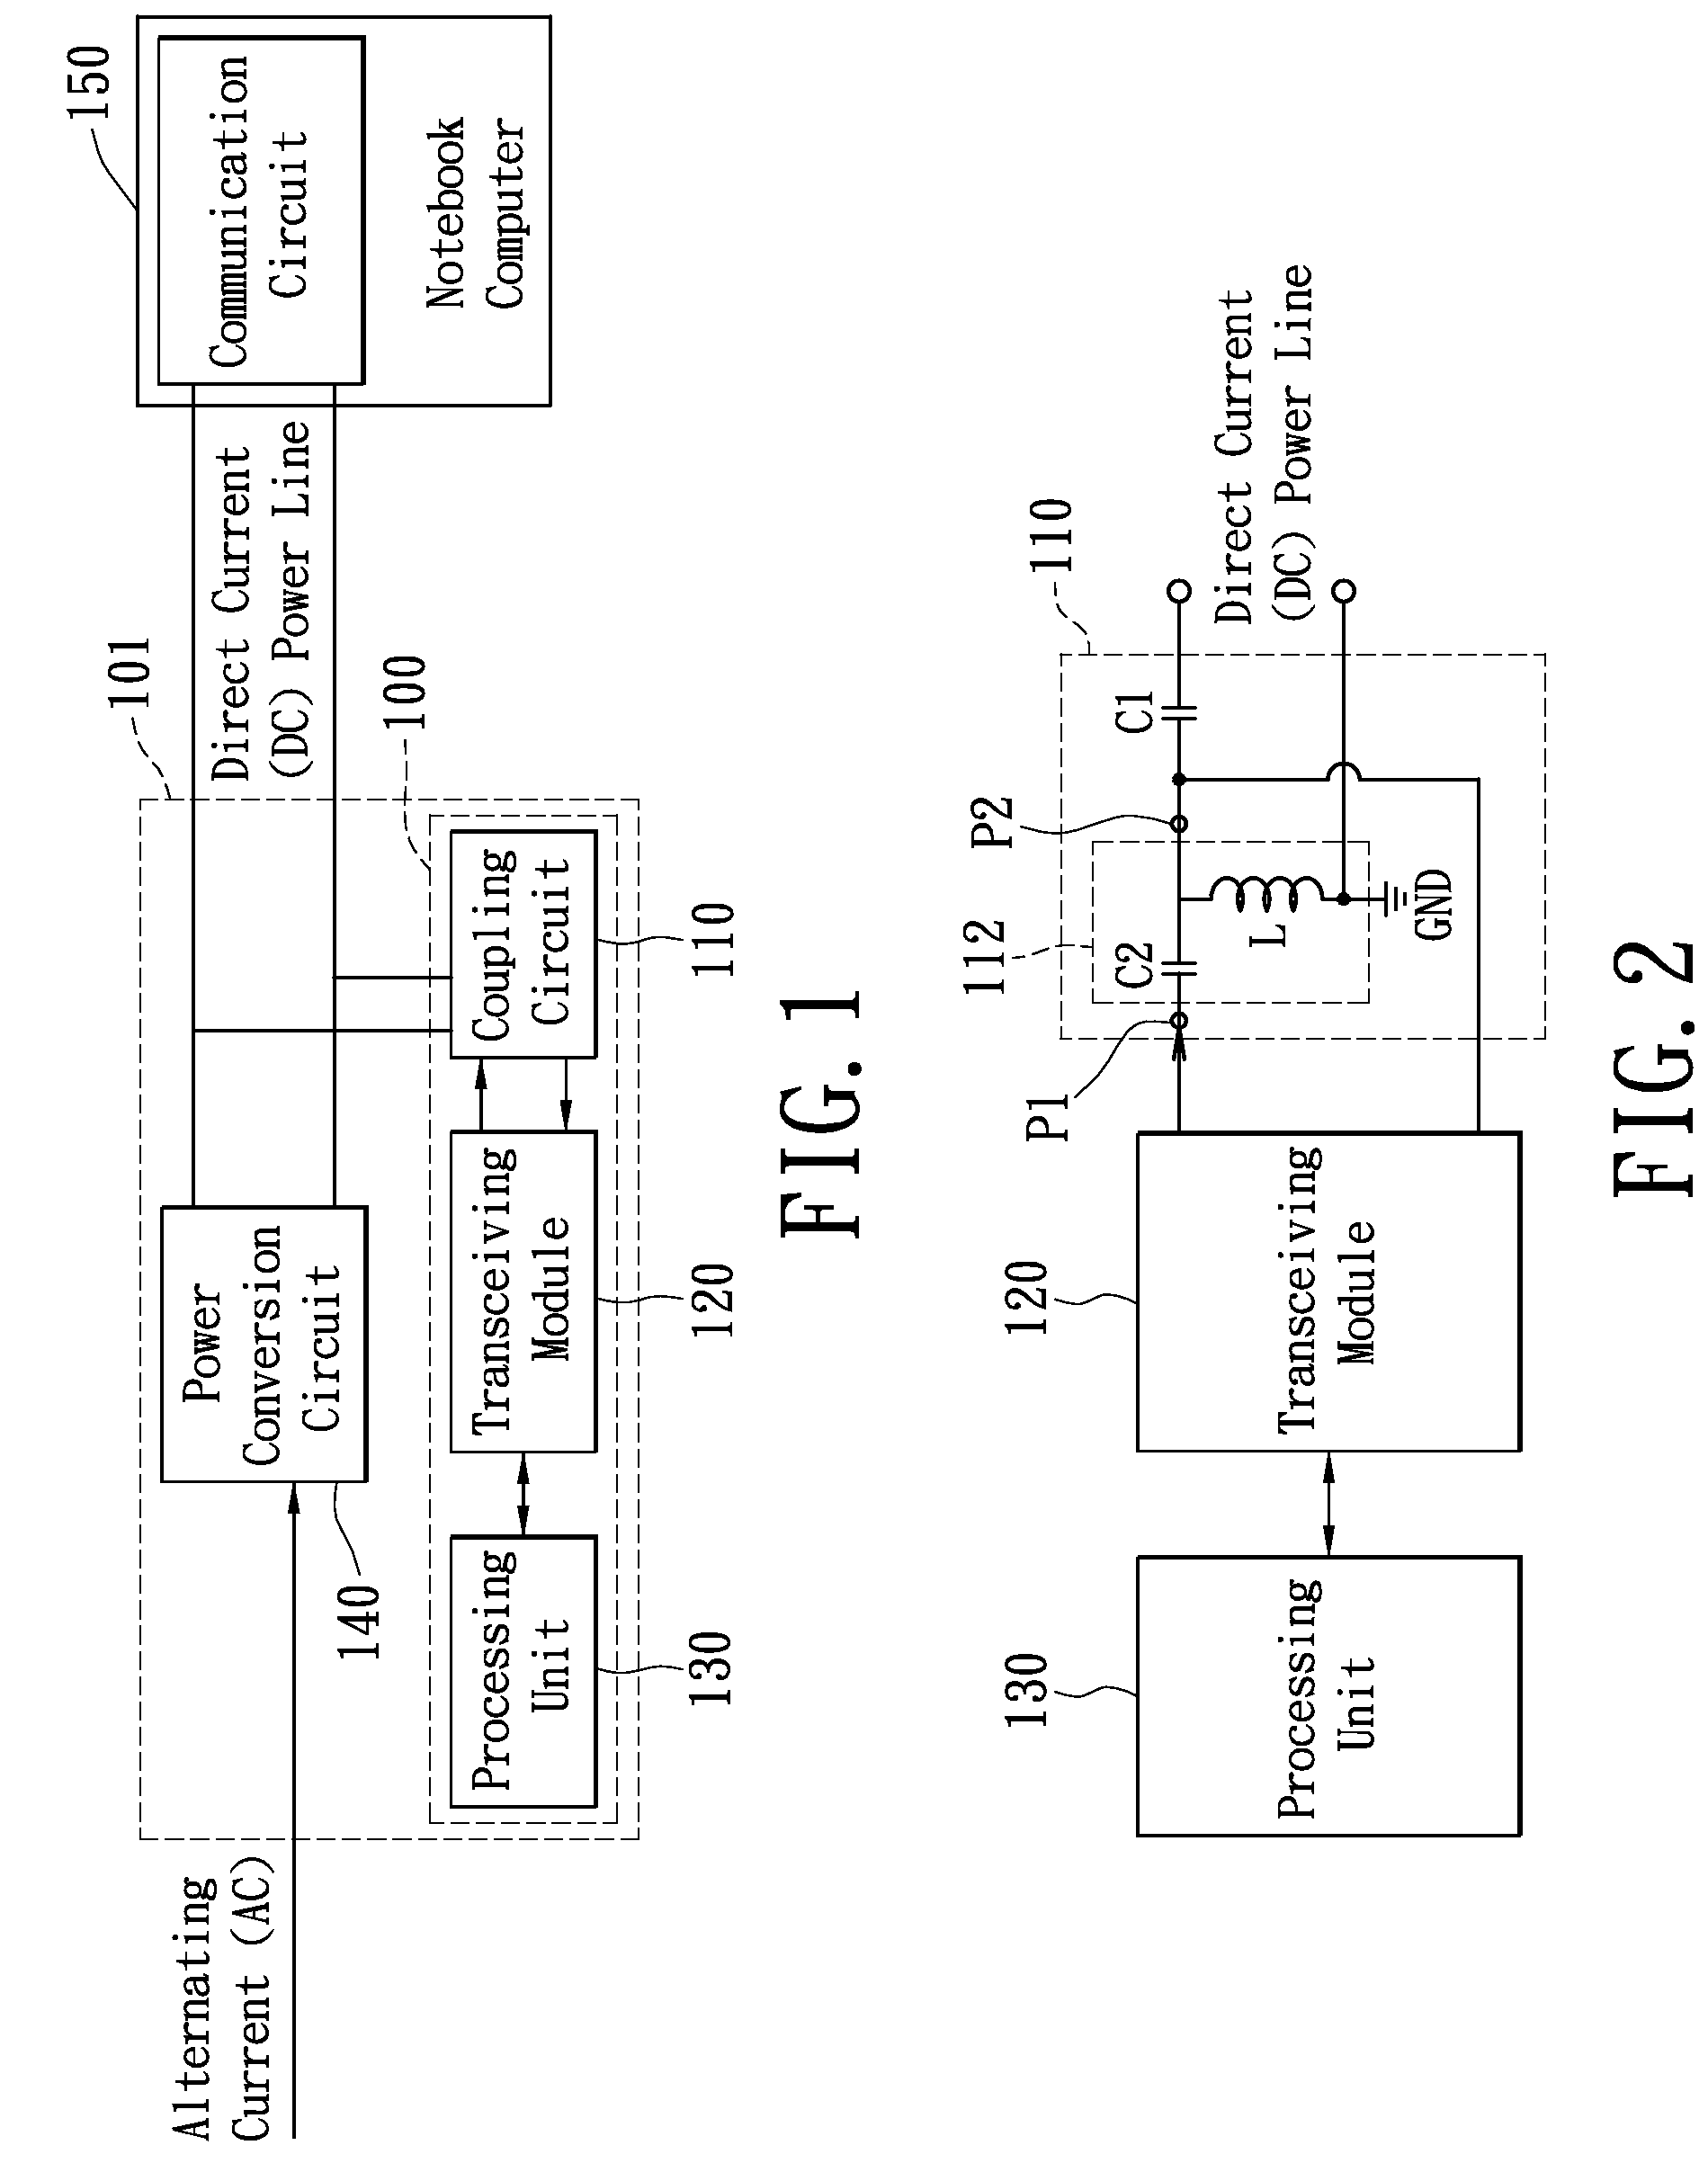 Communication circuit and adapter having the same